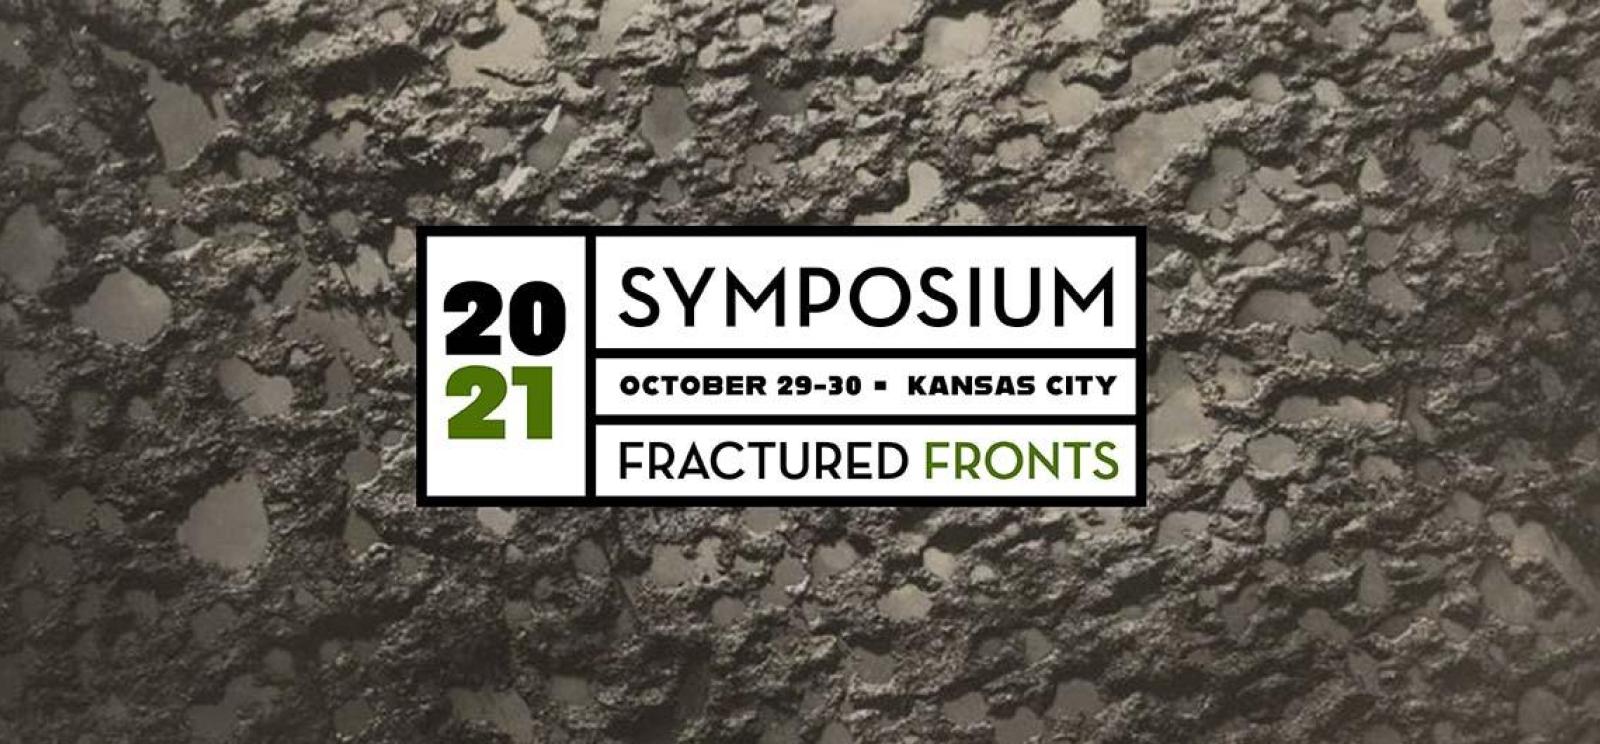 Fractured Fronts - 2021 Symposium